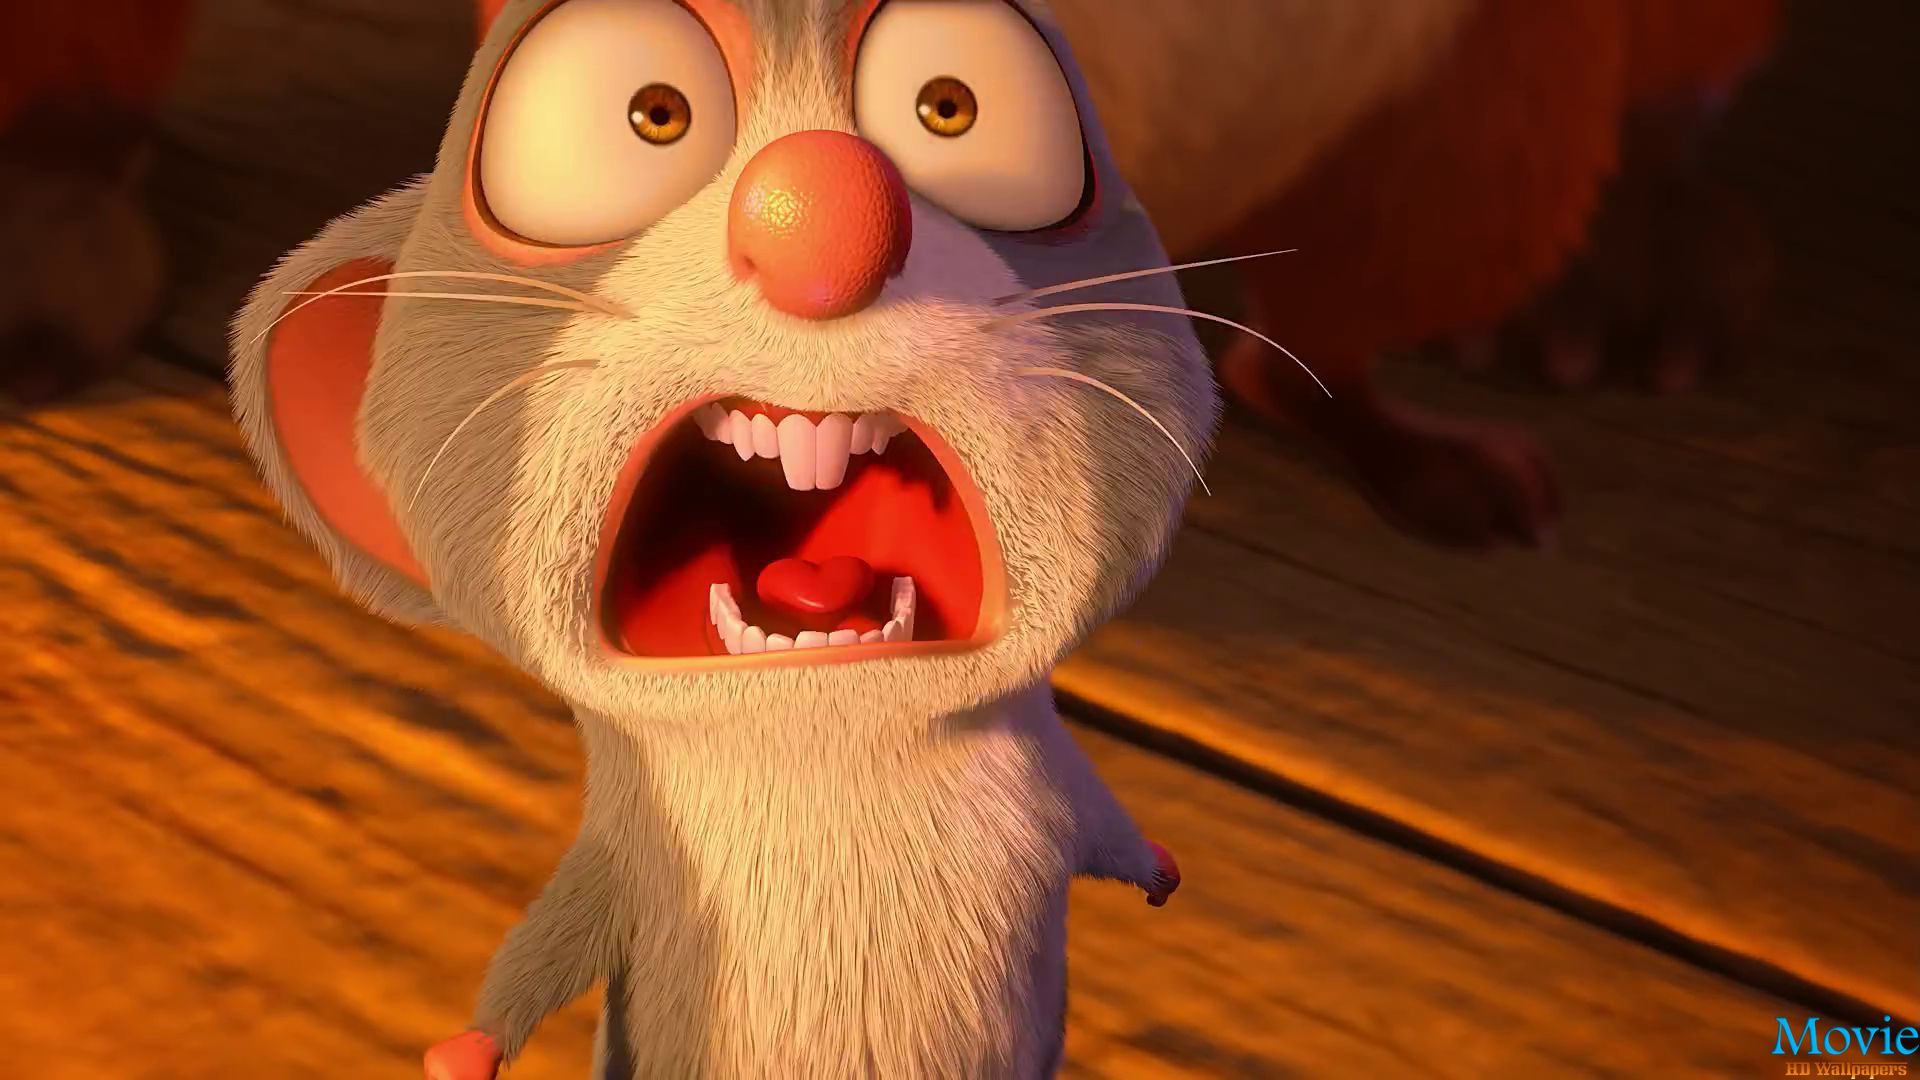 The Nut Job (2014) - Movie HD Wallpapers